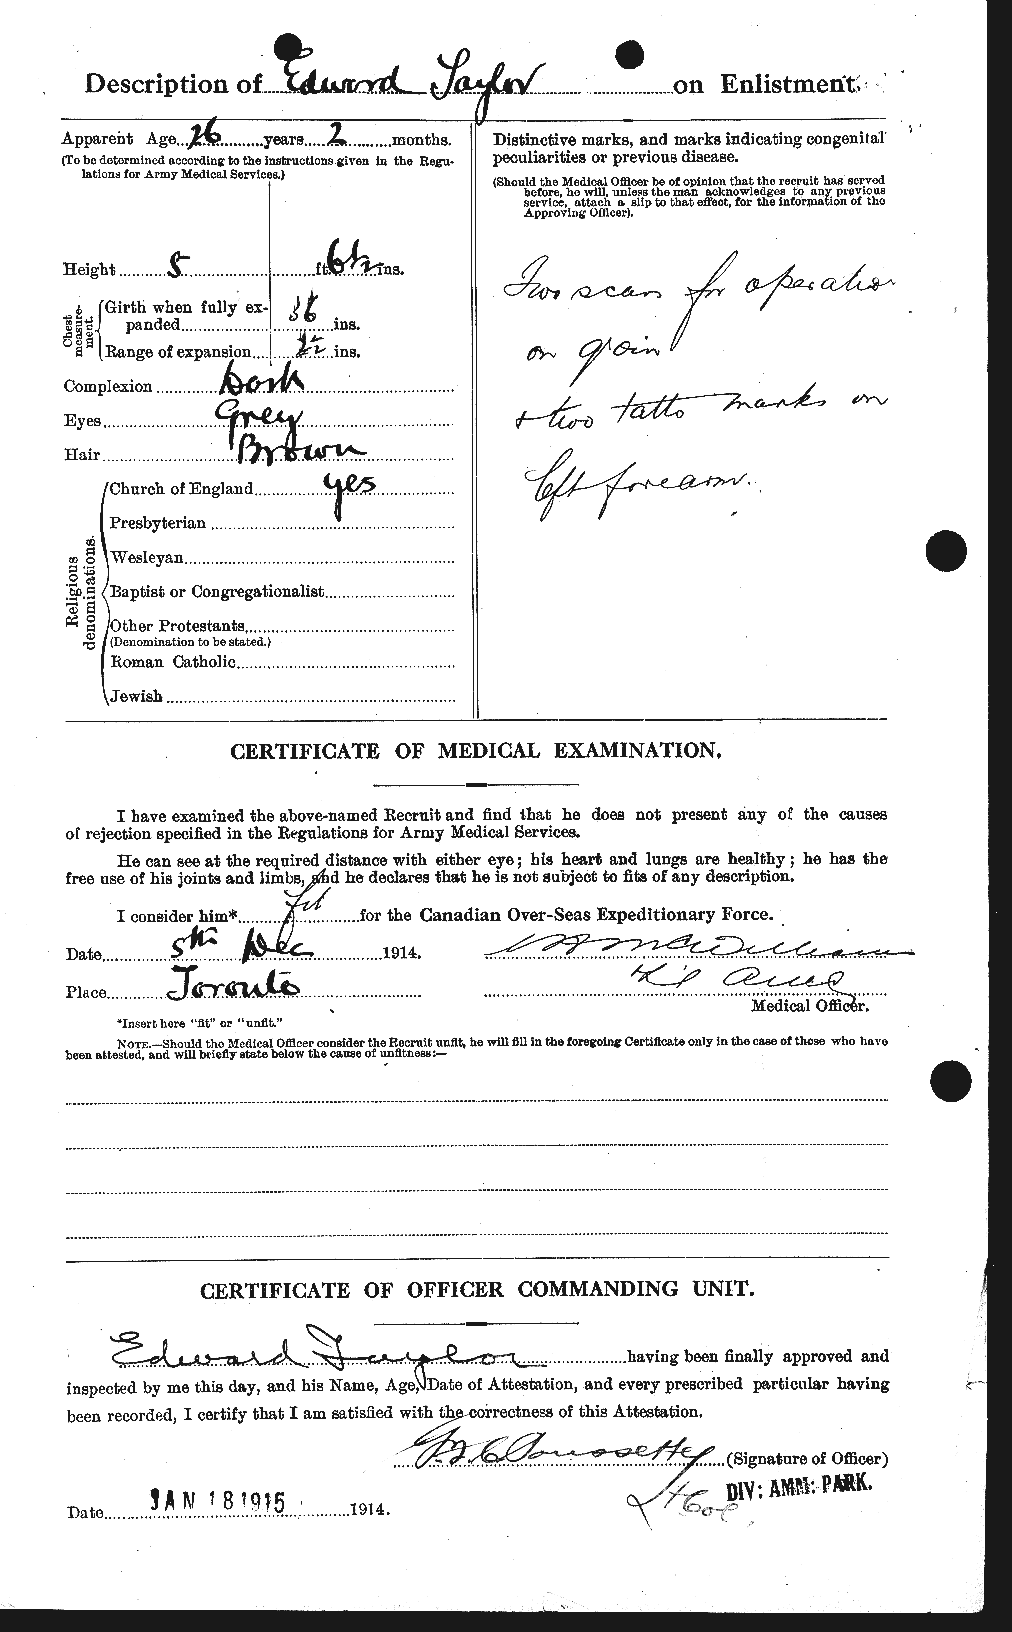 Personnel Records of the First World War - CEF 627304b